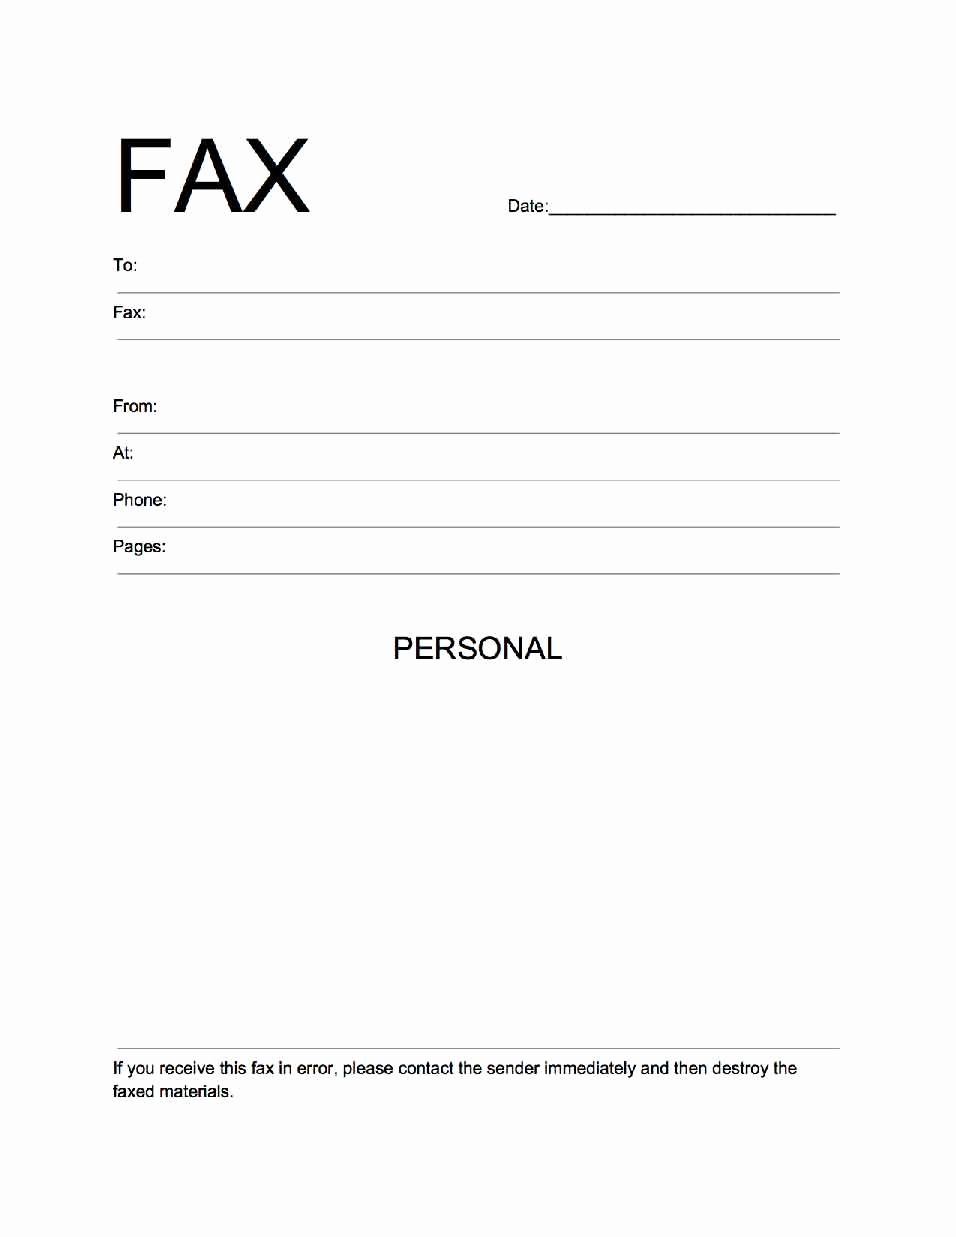 Printable Free Fax Cover Sheet Luxury Free Fax Cover Sheet Template Download